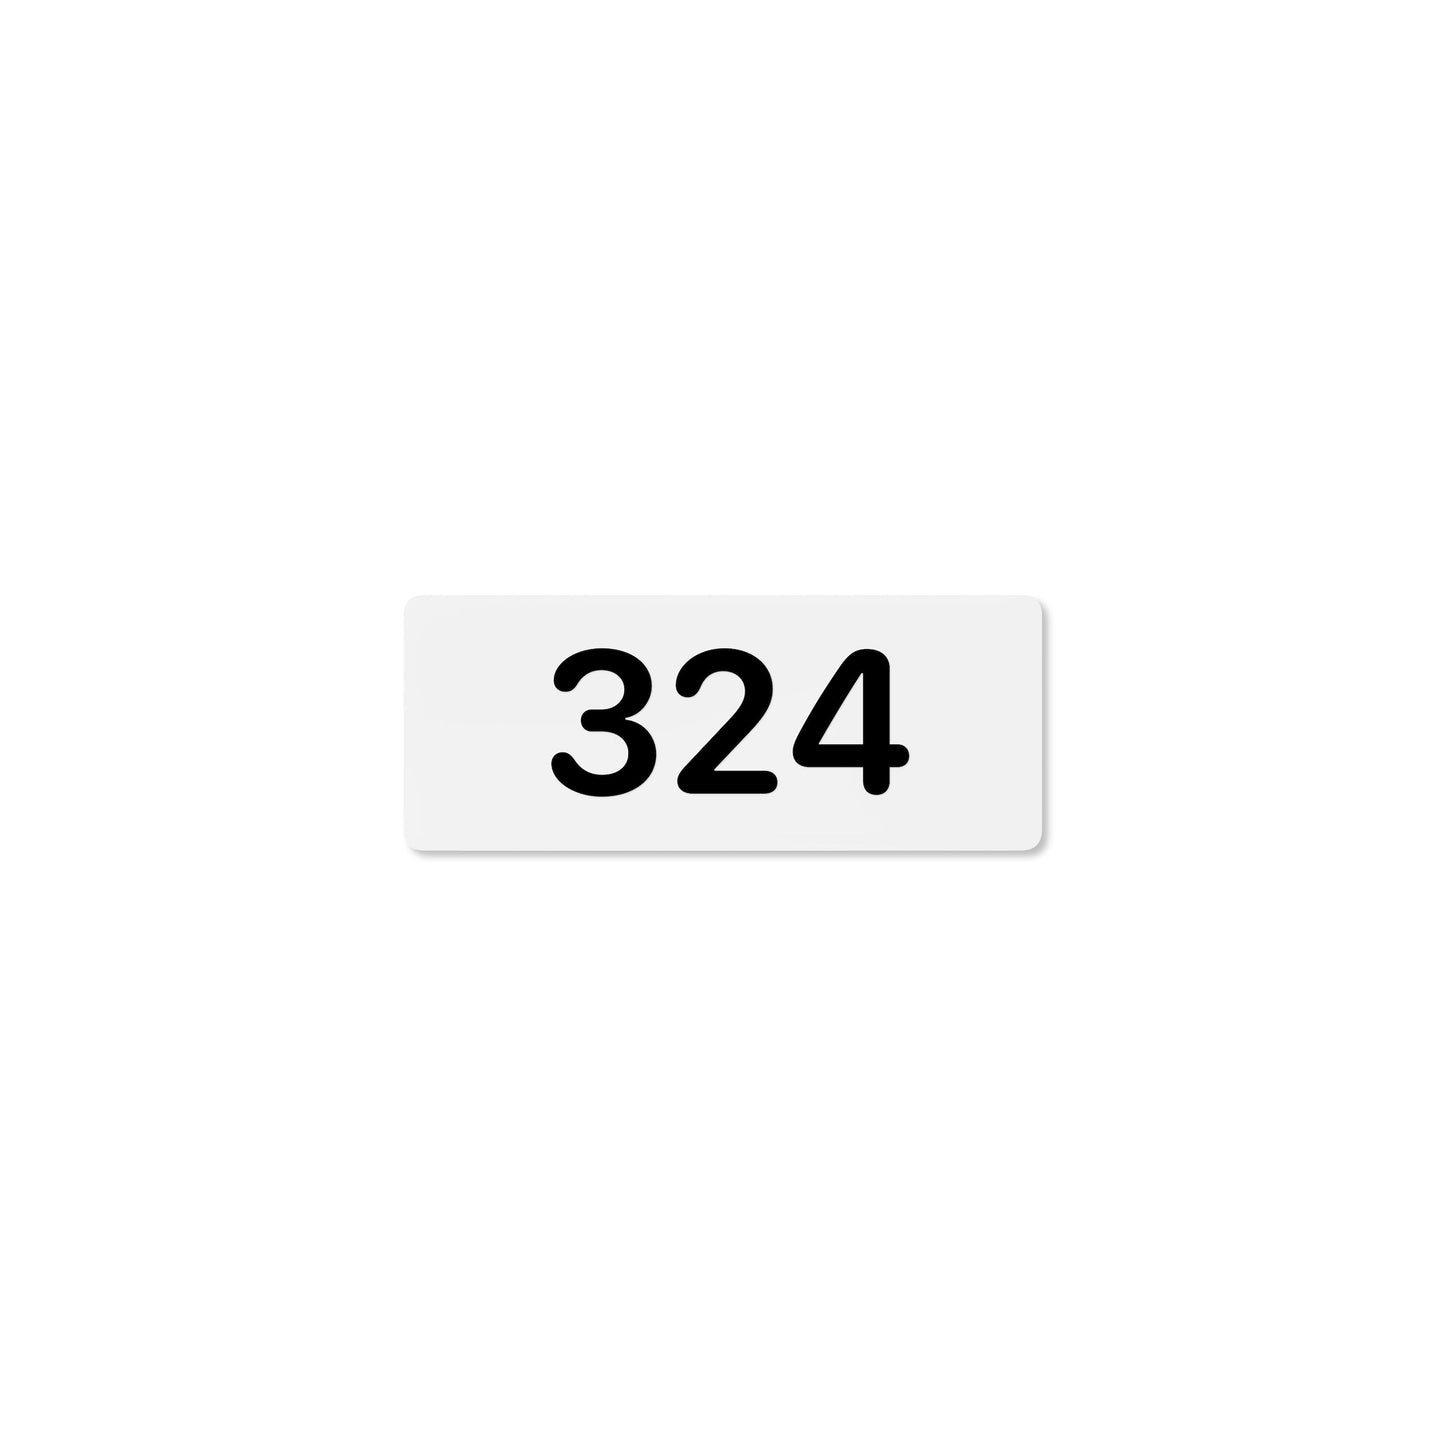 Numeral 324